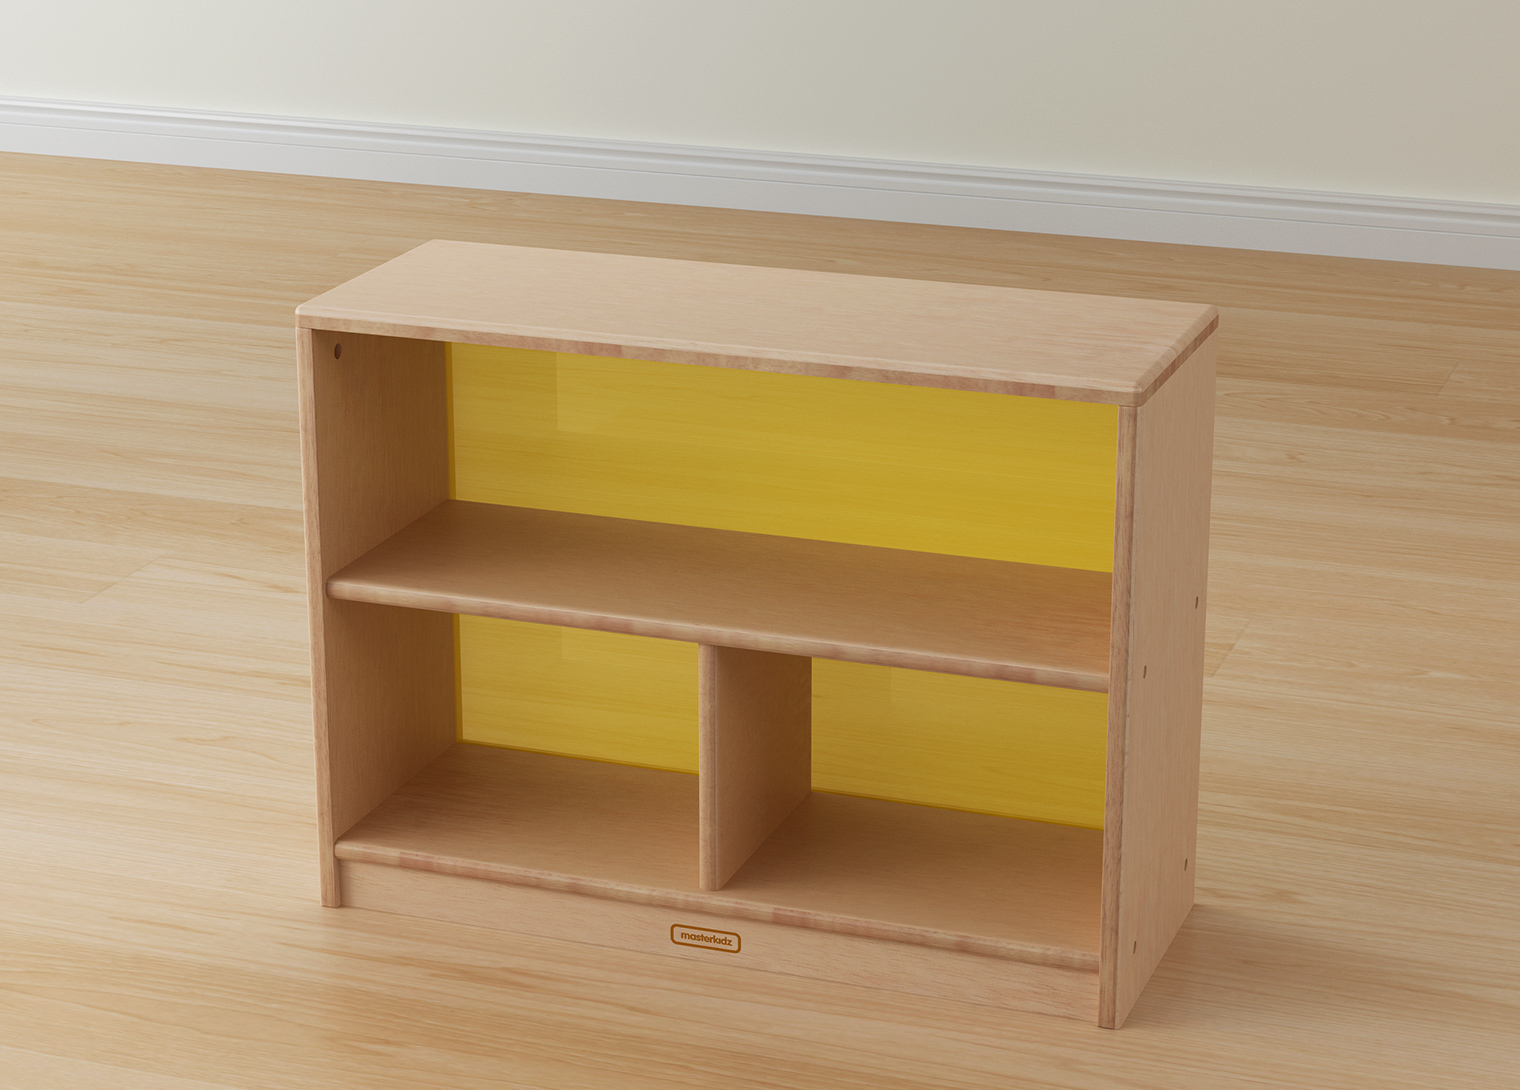 Bern - 609H x 810L Natural Rubber Wood  3-Compartment Shelving Unit - Translucent Yellow Back